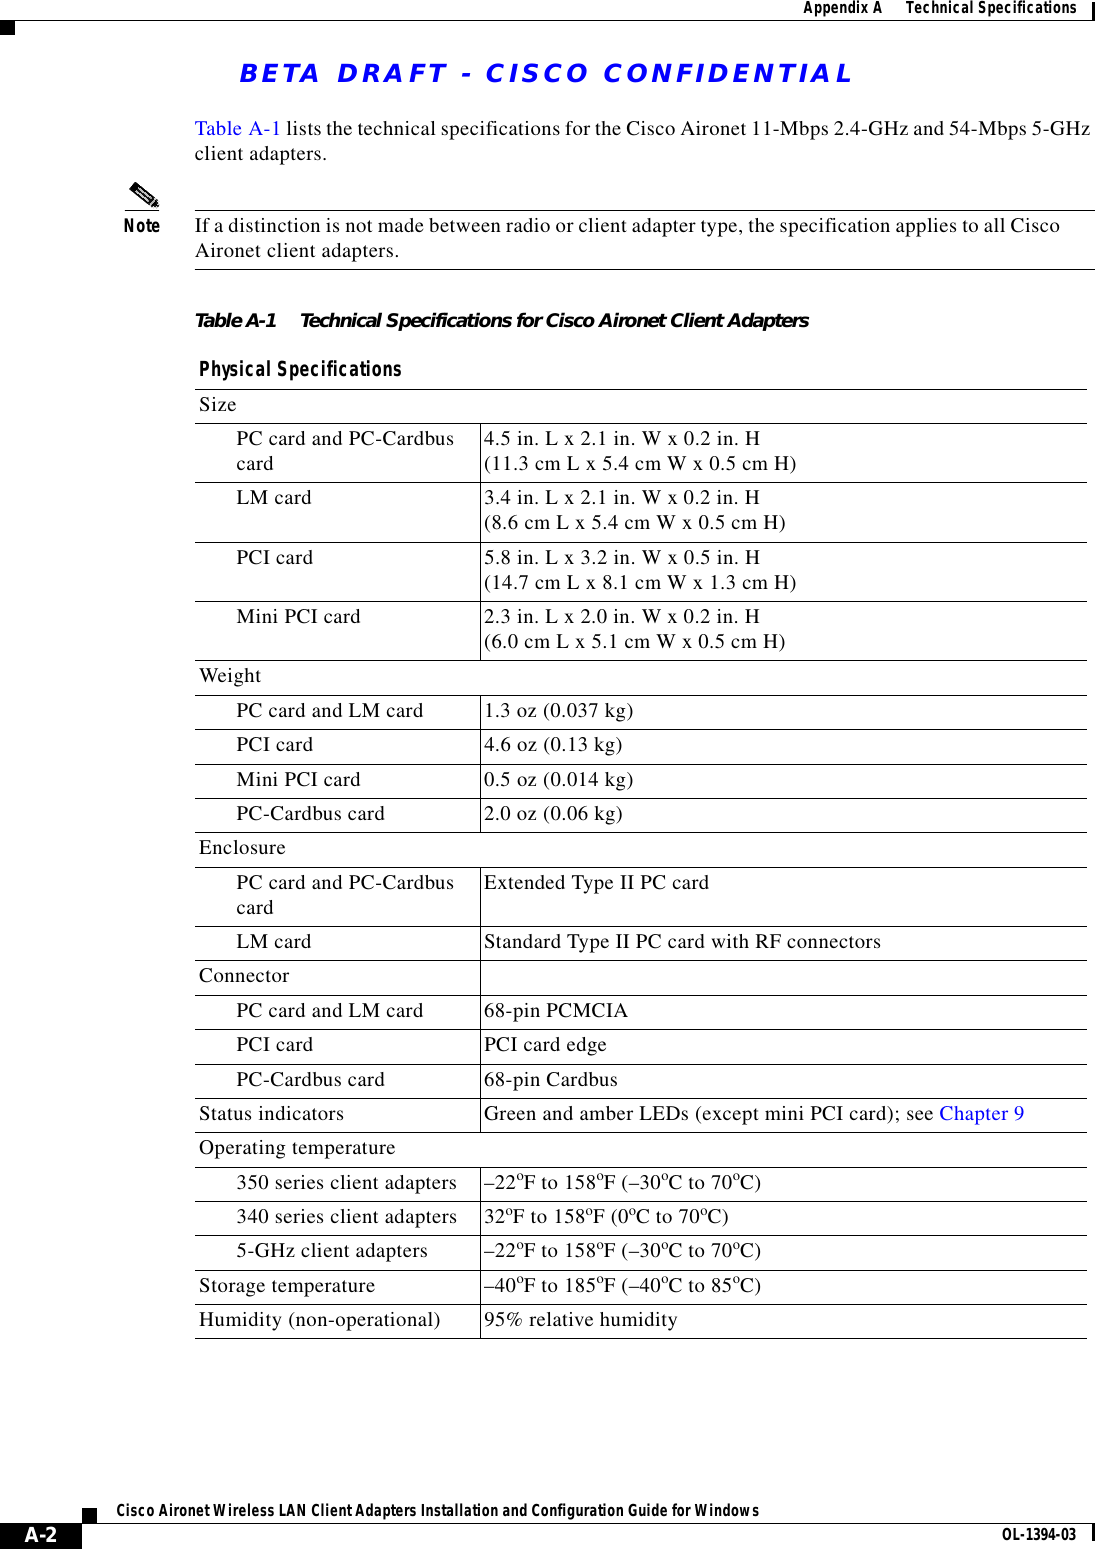 BETA DRAFT - CISCO CONFIDENTIALA-2Cisco Aironet Wireless LAN Client Adapters Installation and Configuration Guide for Windows OL-1394-03Appendix A      Technical SpecificationsTable A-1 lists the technical specifications for the Cisco Aironet 11-Mbps 2.4-GHz and 54-Mbps 5-GHz client adapters.Note If a distinction is not made between radio or client adapter type, the specification applies to all Cisco Aironet client adapters.Table A-1 Technical Specifications for Cisco Aironet Client AdaptersPhysical SpecificationsSizePC card and PC-Cardbus card 4.5 in. L x 2.1 in. W x 0.2 in. H(11.3 cm L x 5.4 cm W x 0.5 cm H)LM card 3.4 in. L x 2.1 in. W x 0.2 in. H(8.6 cm L x 5.4 cm W x 0.5 cm H)PCI card 5.8 in. L x 3.2 in. W x 0.5 in. H(14.7 cm L x 8.1 cm W x 1.3 cm H)Mini PCI card 2.3 in. L x 2.0 in. W x 0.2 in. H(6.0 cm L x 5.1 cm W x 0.5 cm H)WeightPC card and LM card 1.3 oz (0.037 kg)PCI card 4.6 oz (0.13 kg)Mini PCI card 0.5 oz (0.014 kg)PC-Cardbus card 2.0 oz (0.06 kg)EnclosurePC card and PC-Cardbus card Extended Type II PC cardLM card Standard Type II PC card with RF connectorsConnectorPC card and LM card 68-pin PCMCIAPCI card PCI card edgePC-Cardbus card 68-pin CardbusStatus indicators Green and amber LEDs (except mini PCI card); see Chapter 9Operating temperature350 series client adapters –22oF to 158oF (–30oC to 70oC)340 series client adapters 32oF to 158oF (0oC to 70oC)5-GHz client adapters –22oF to 158oF (–30oC to 70oC)Storage temperature –40oF to 185oF (–40oC to 85oC)Humidity (non-operational) 95% relative humidity